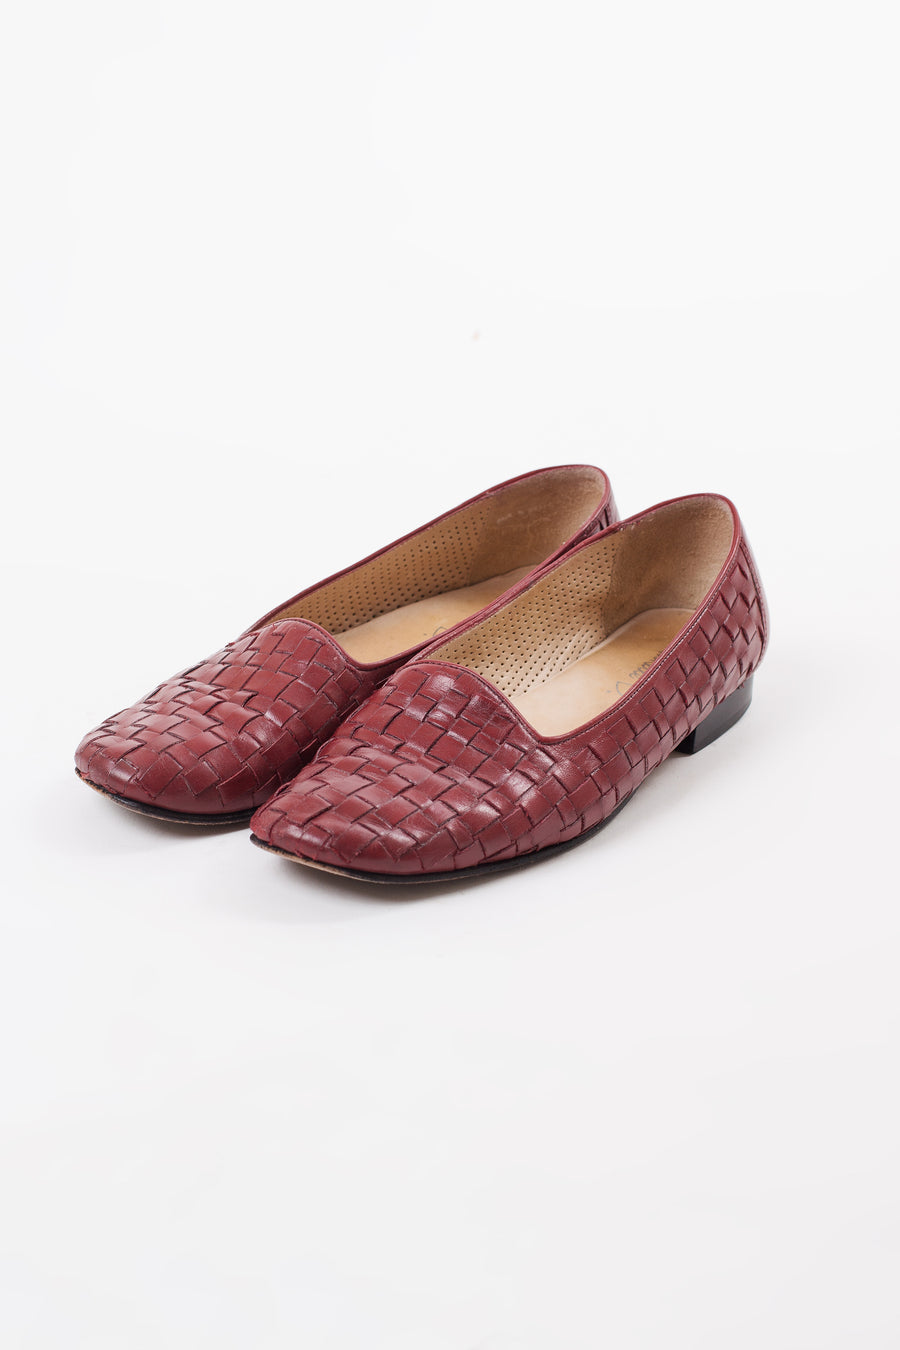 Vintage 80's Red Woven Loafers | 8M